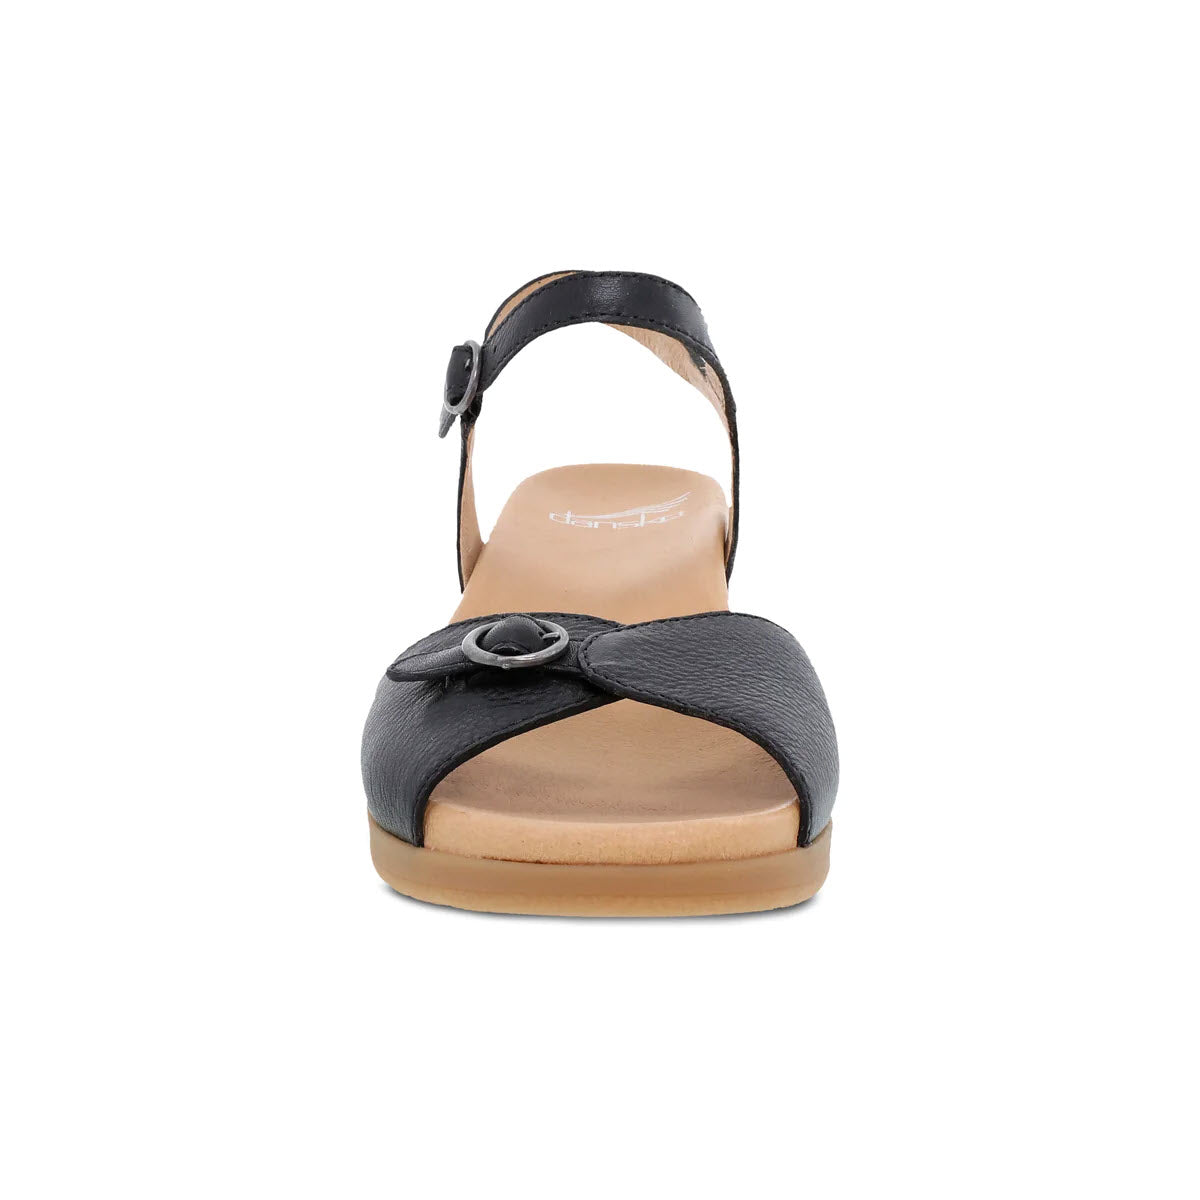 Dansko black leather heeled sandal with a single strap over the toe and an ankle strap, set against a white background.